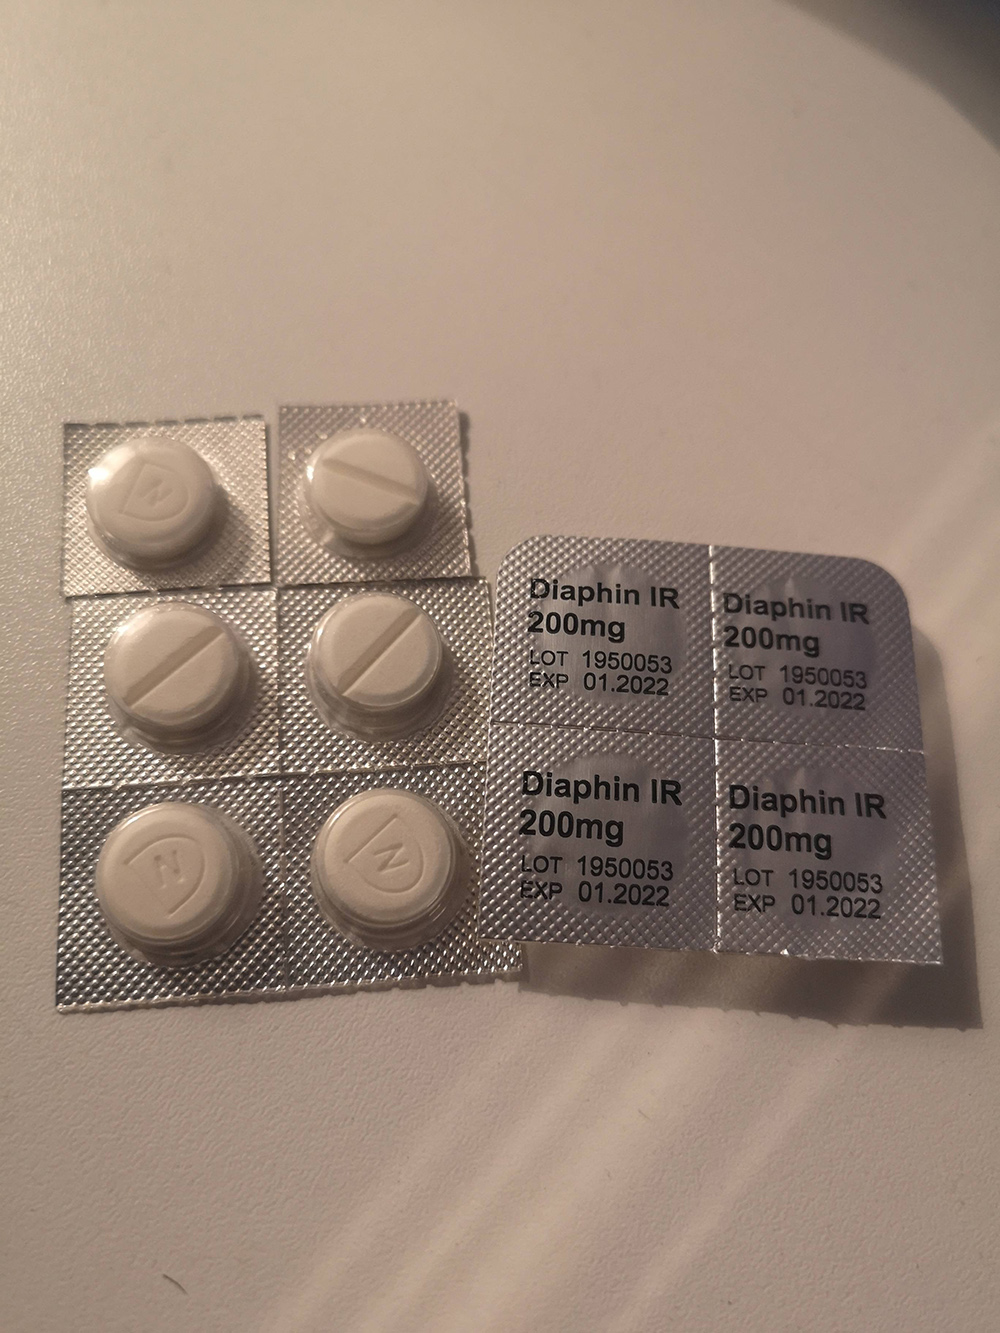 Pharmaceutical Heroin from Switzerland (Diaphin) for Sale